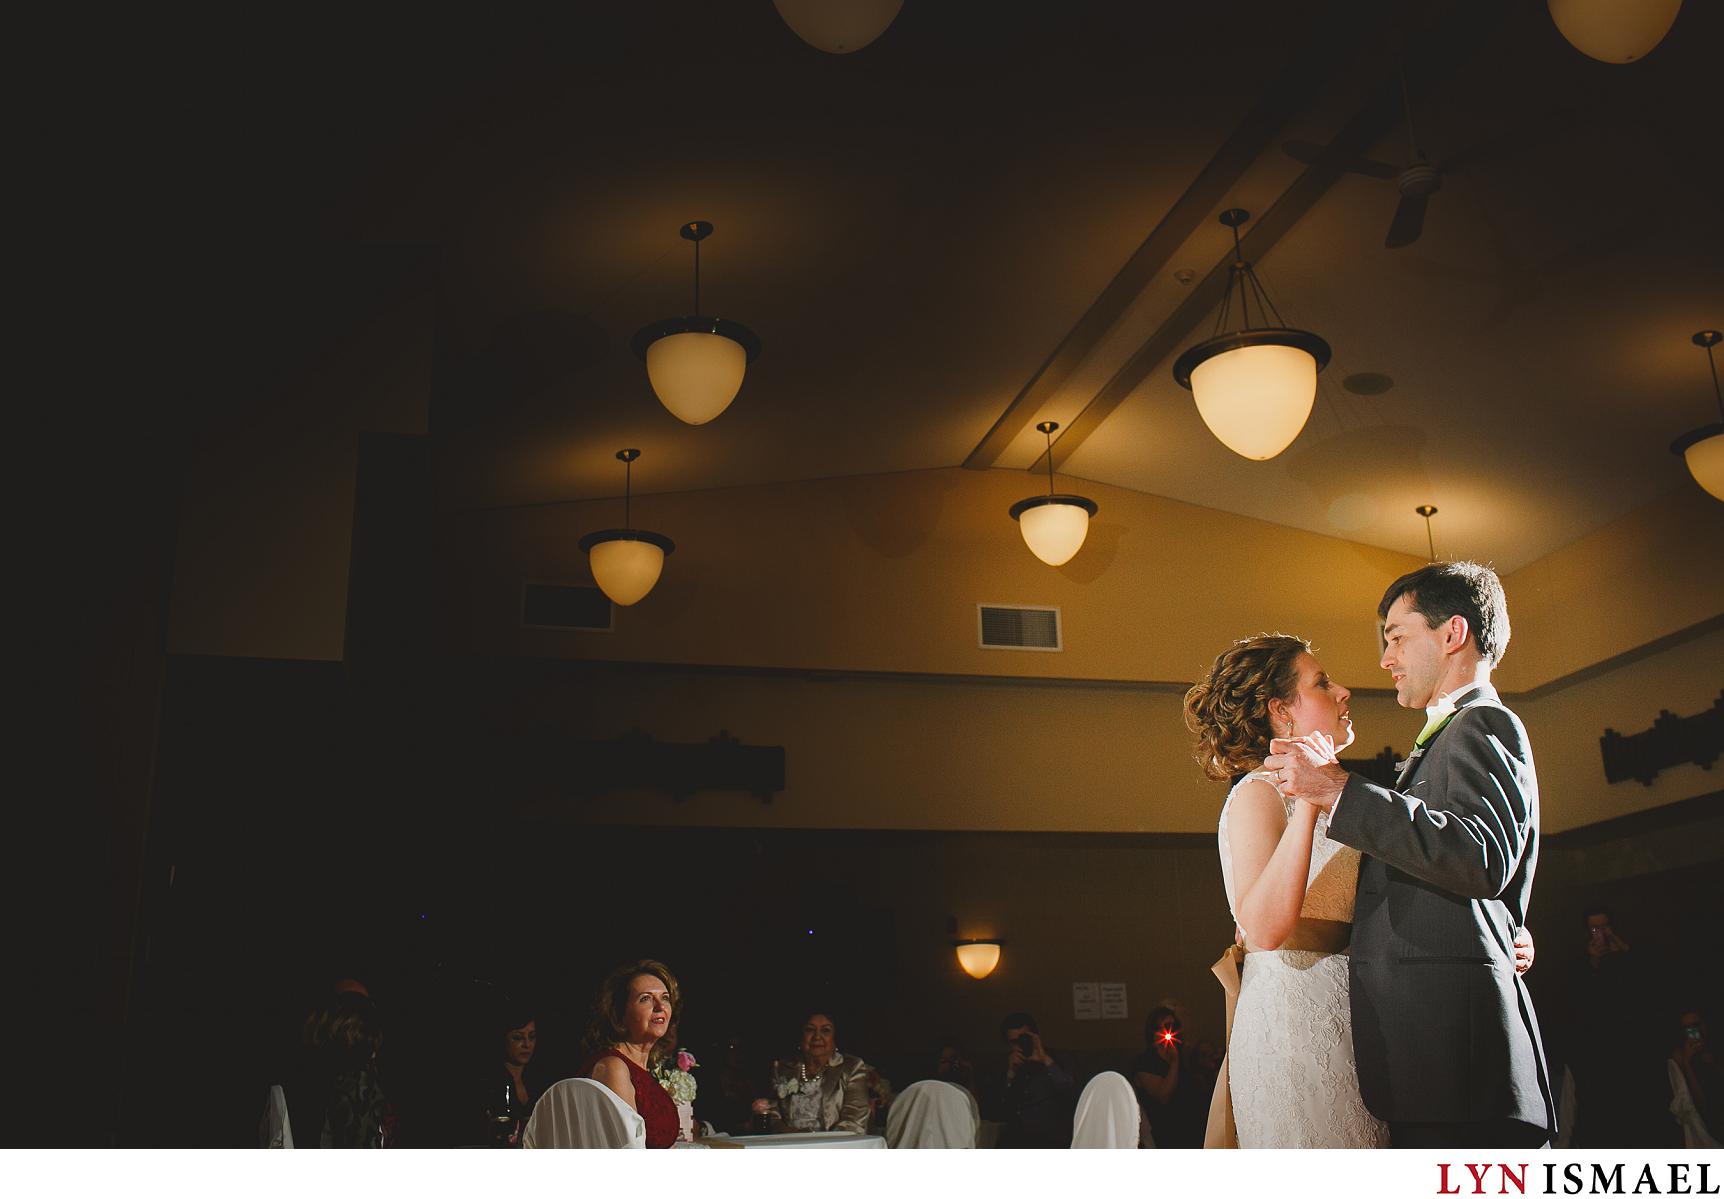 Bride and groom dances for the first time as a couple at their Stoney Creek wedding.